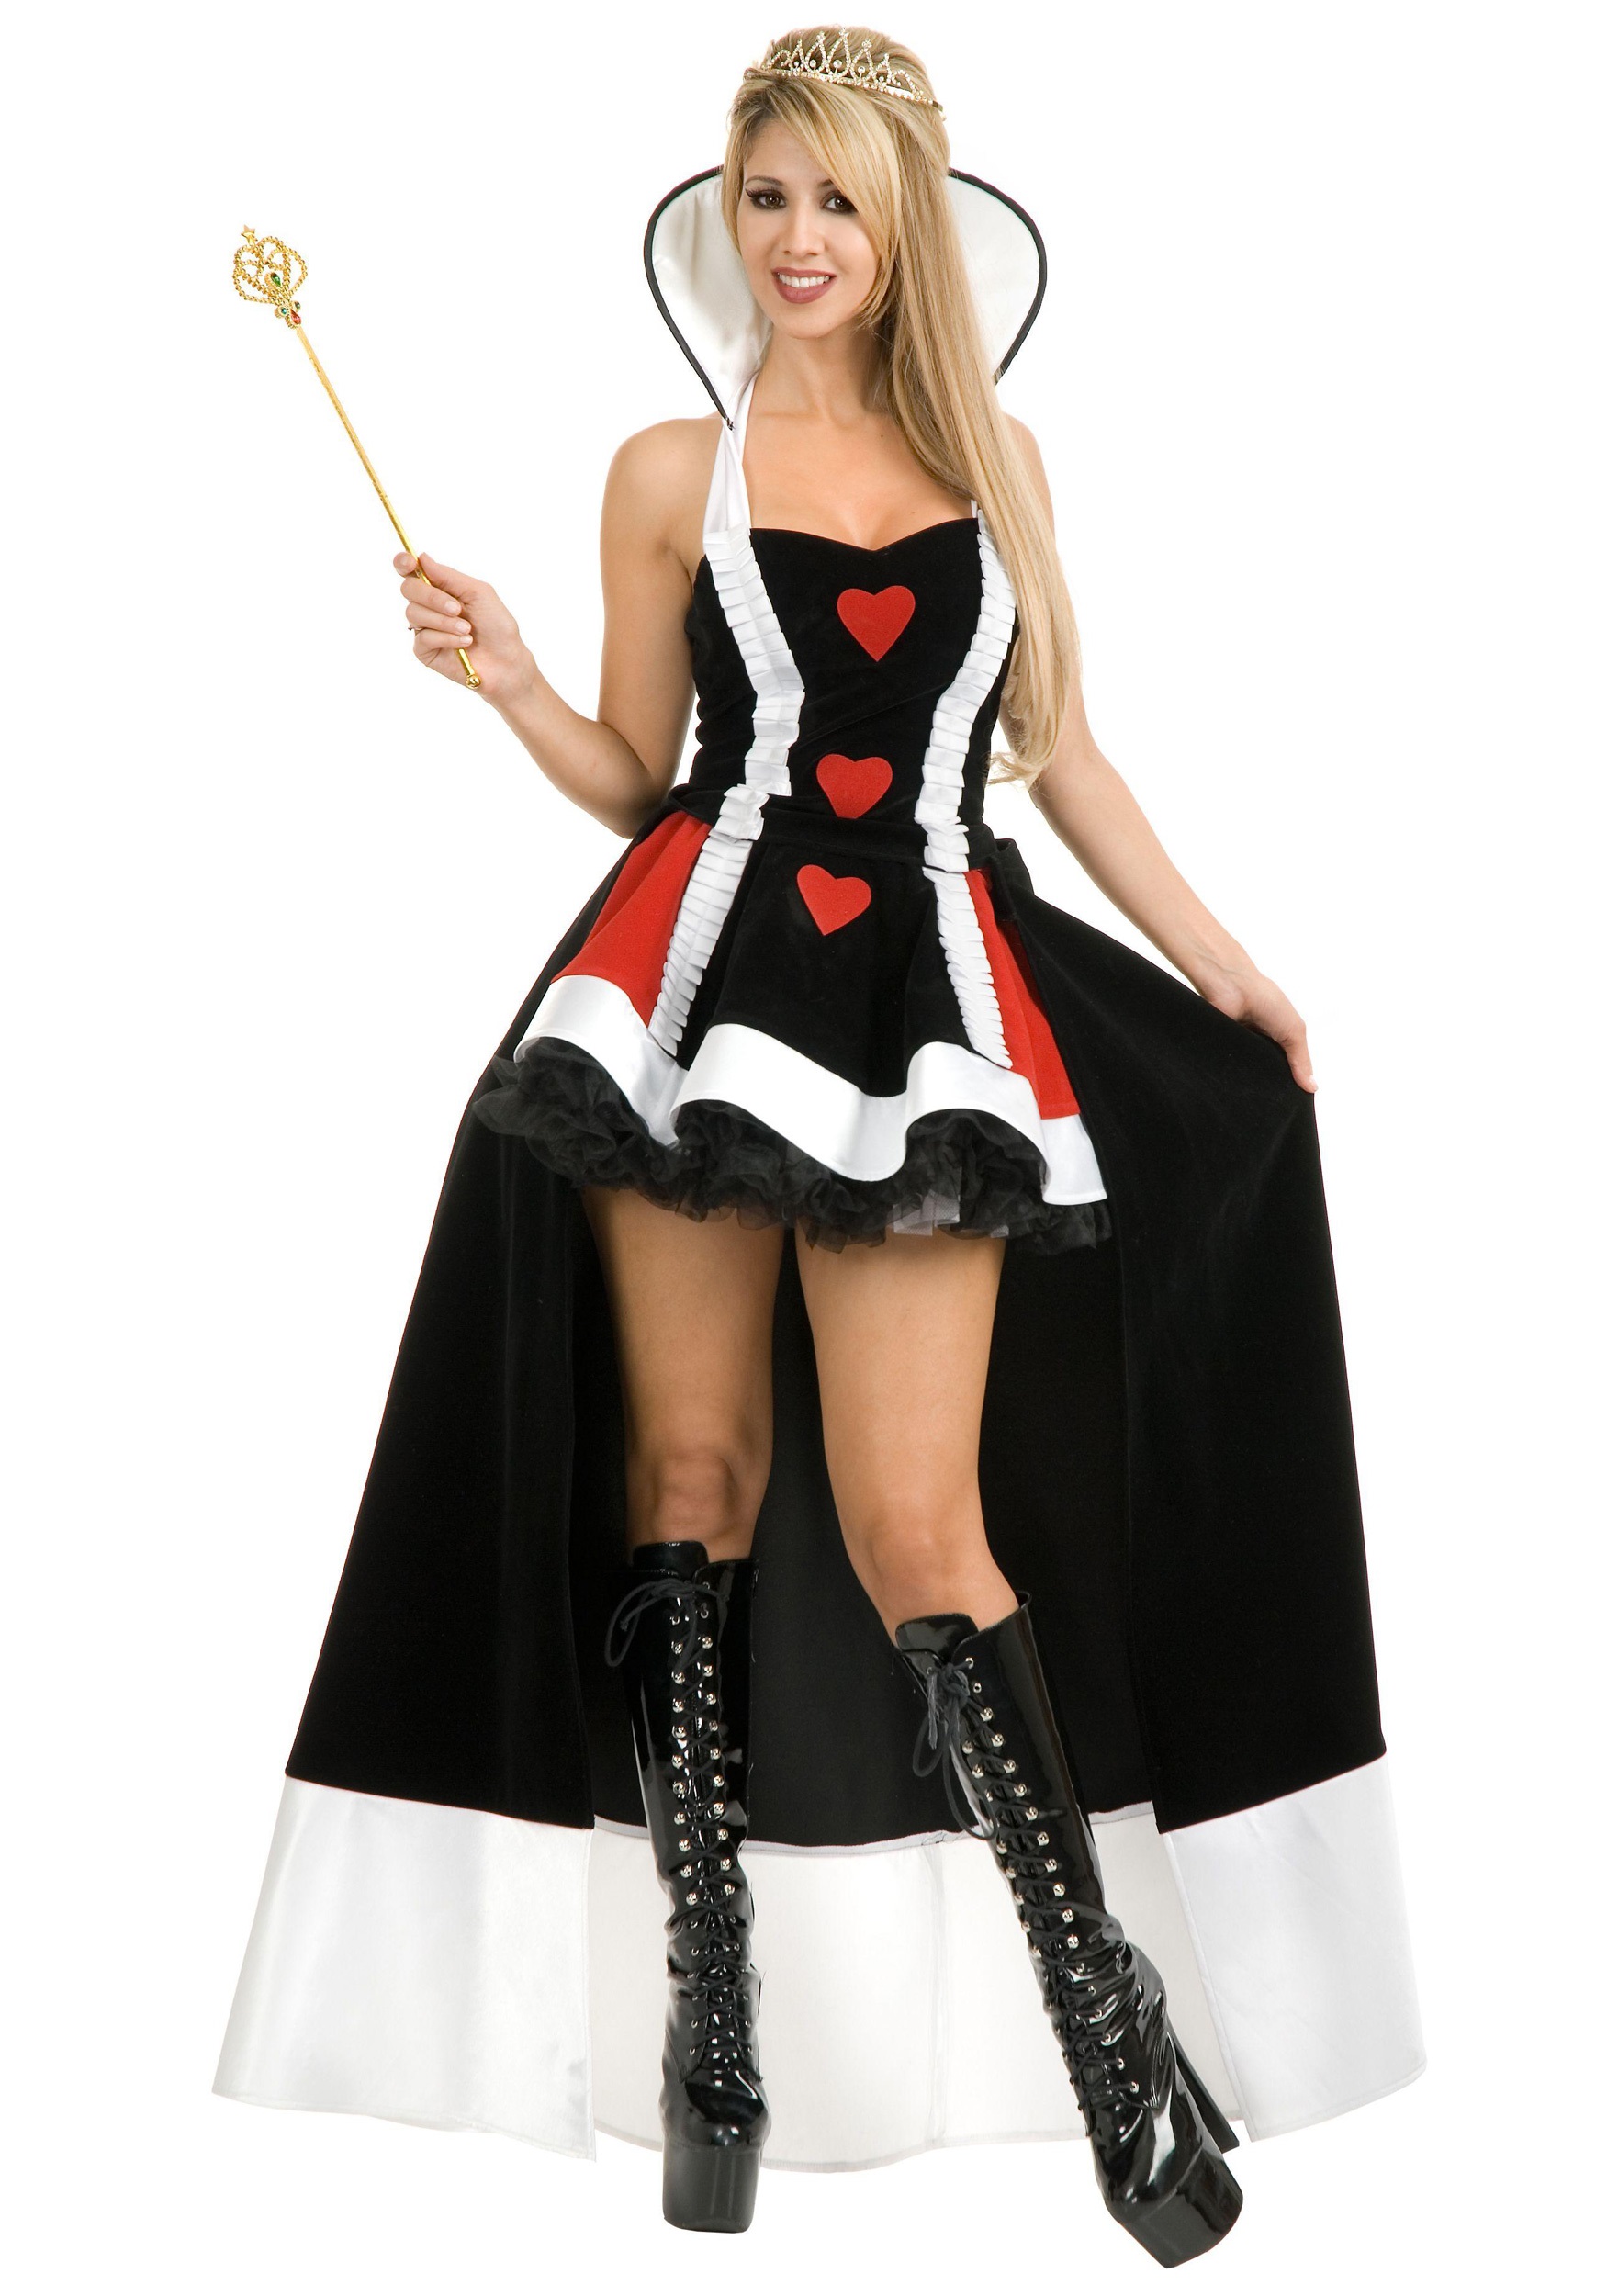 Christys Dress Up Girls Queen Of Hearts Wonderland Fancy Dress Costume Outfit 